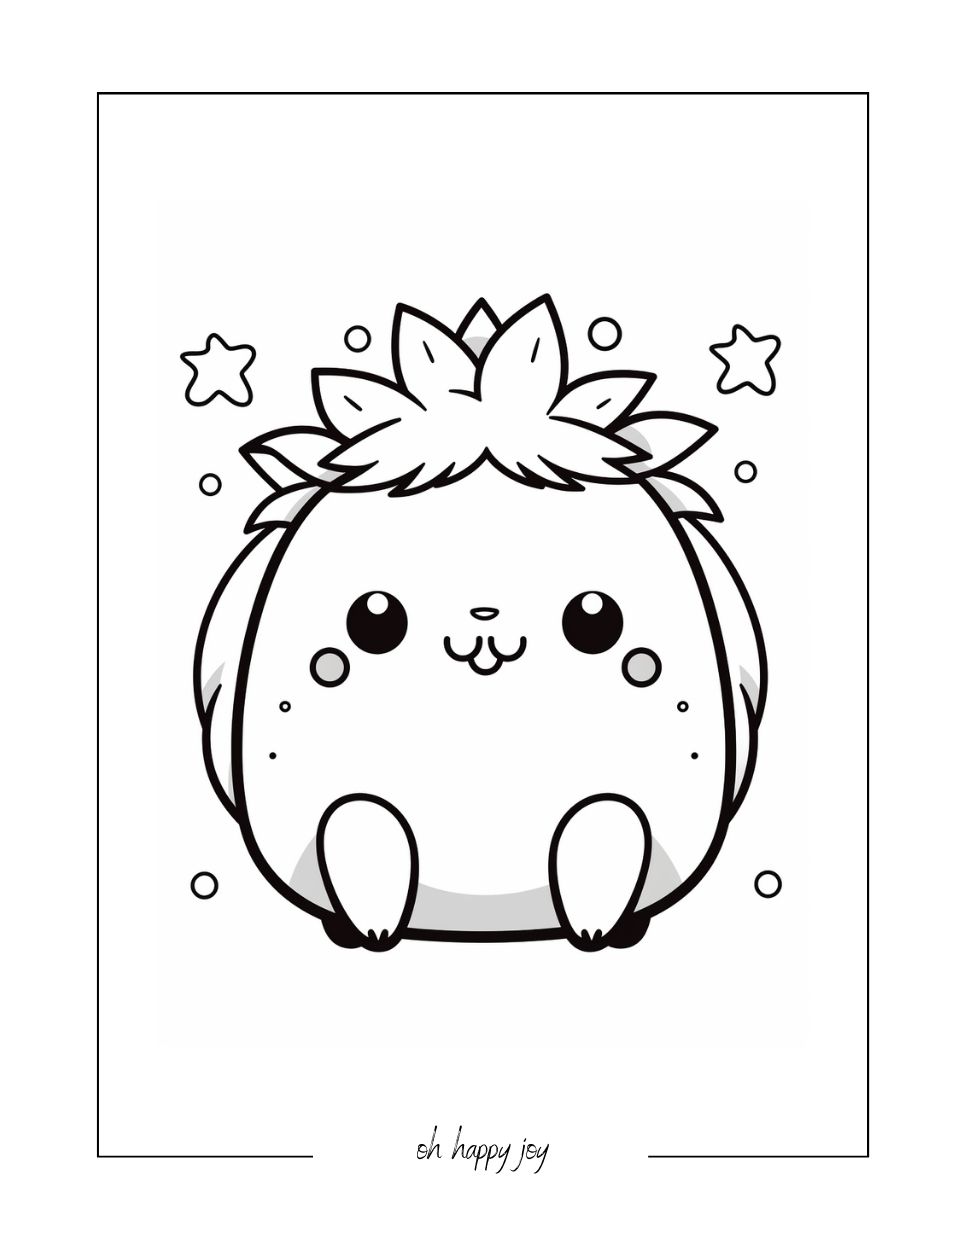 Starry squishmallow coloring page